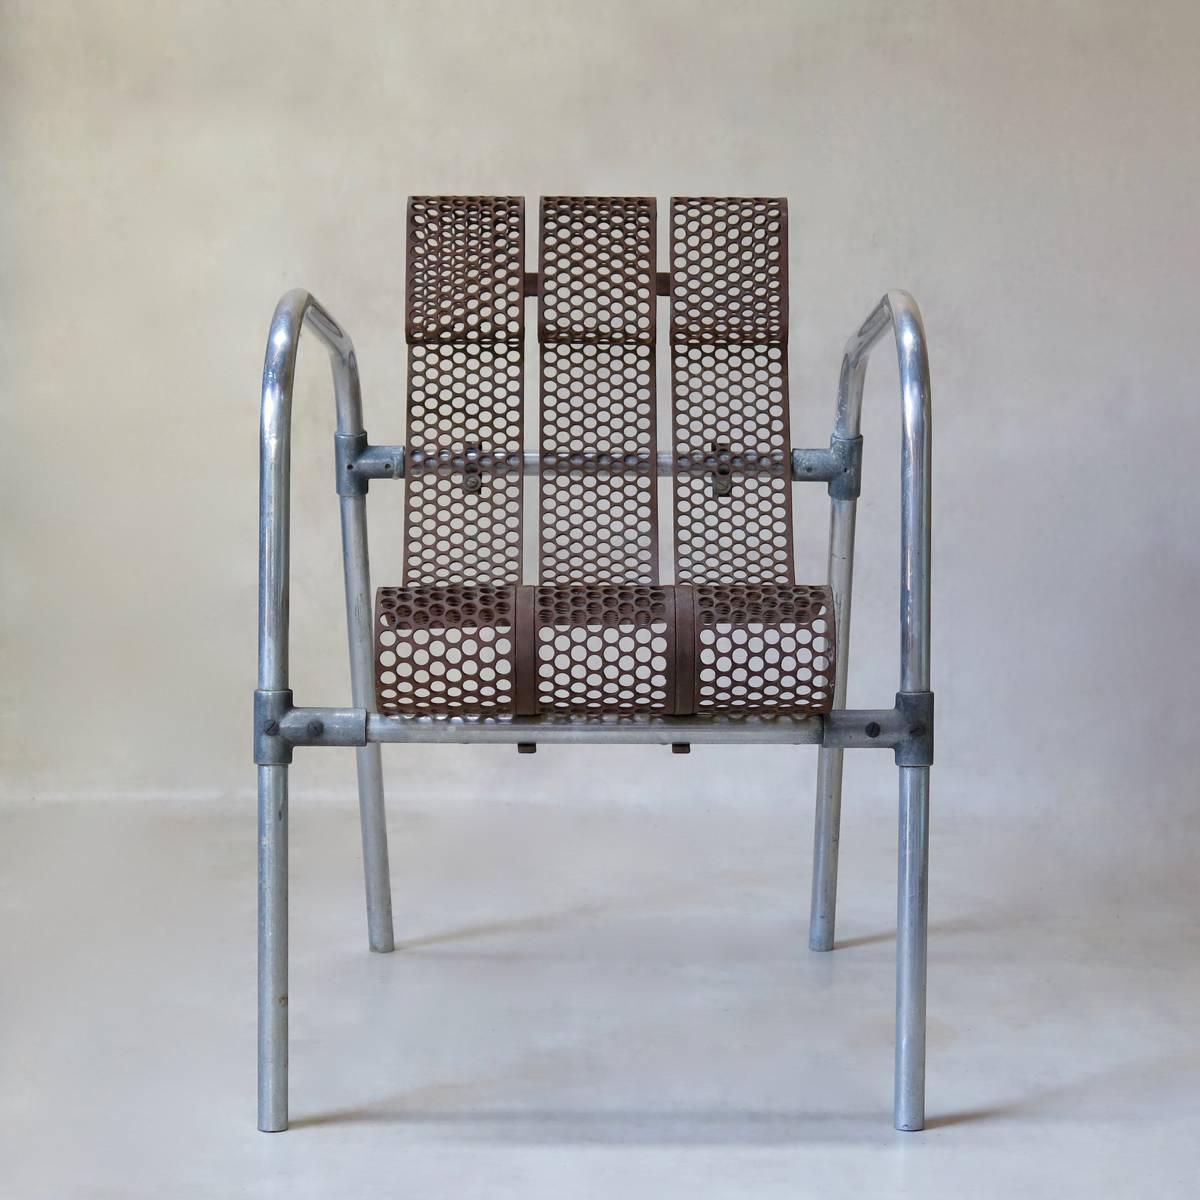 A rare pair of armchairs with a tubular aluminium structure and seats made of strips of perforated sheet metal. Ingenious design by Claude Adrien for Meubles Artsitiques Modernes (M.A.M.) from the early 1950s.